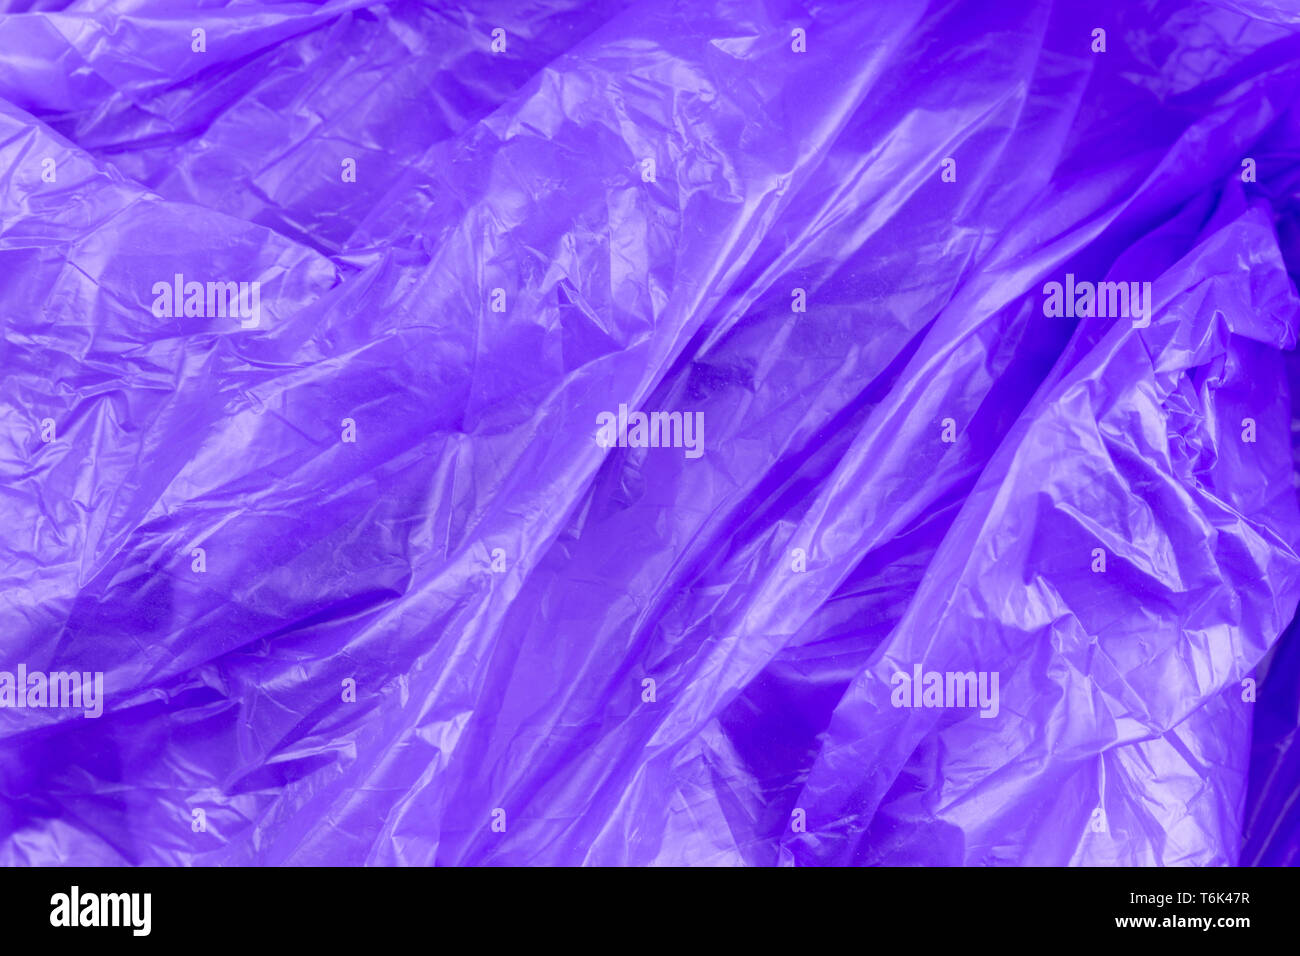 https://c8.alamy.com/comp/T6K47R/abstract-texture-of-purple-cellophane-garbage-bag-macro-close-up-background-T6K47R.jpg